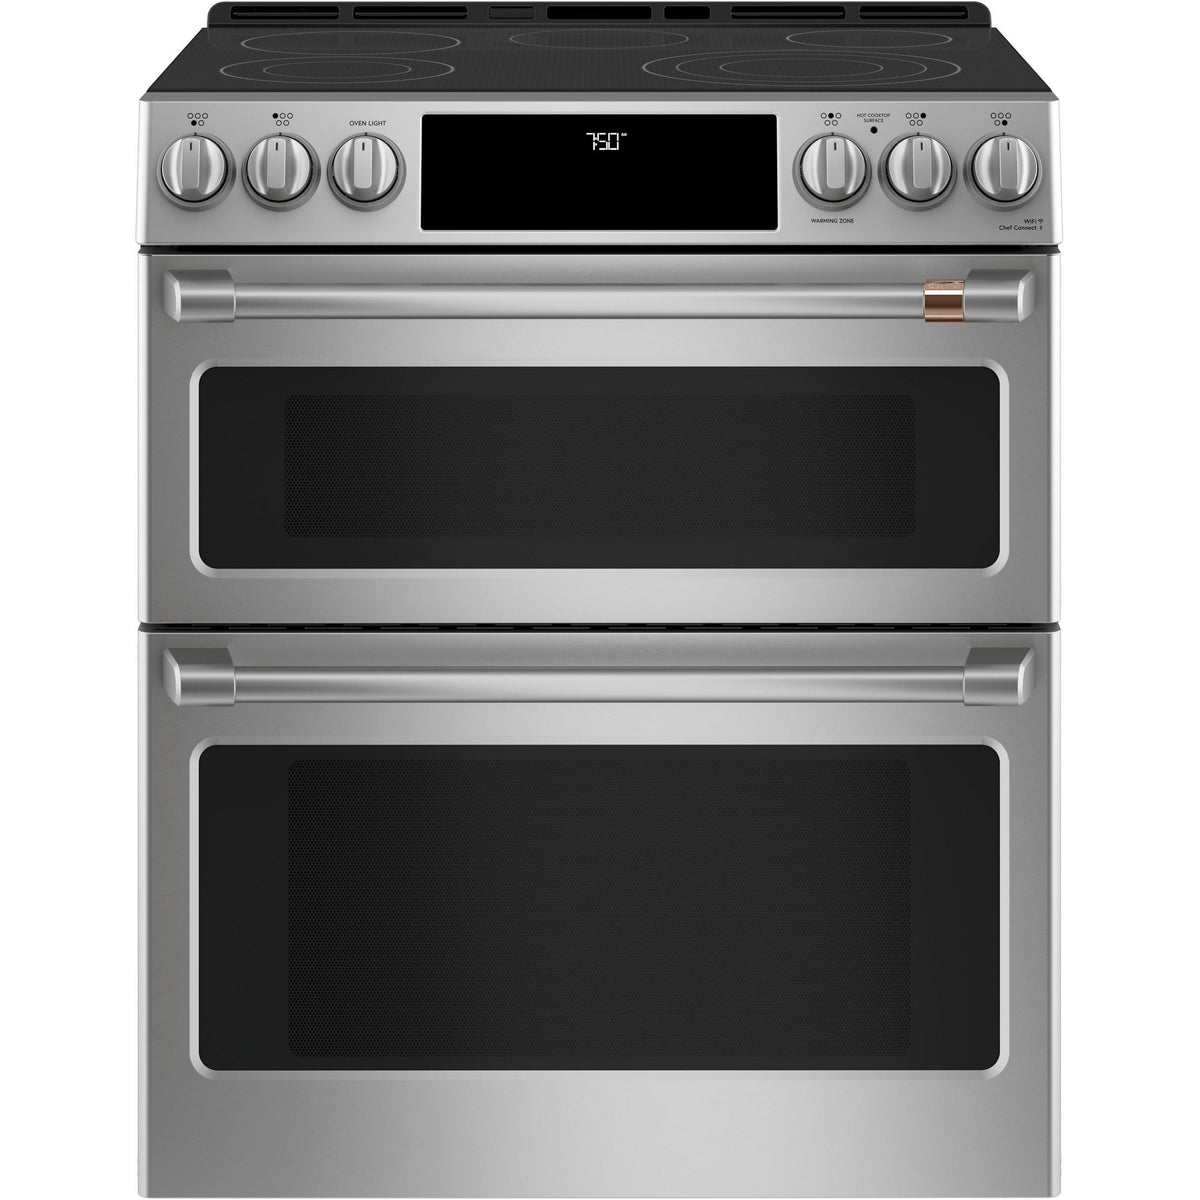 30-inch Slide-in Electric Range with Wi-Fi CCES750P2MS1 IMAGE 1